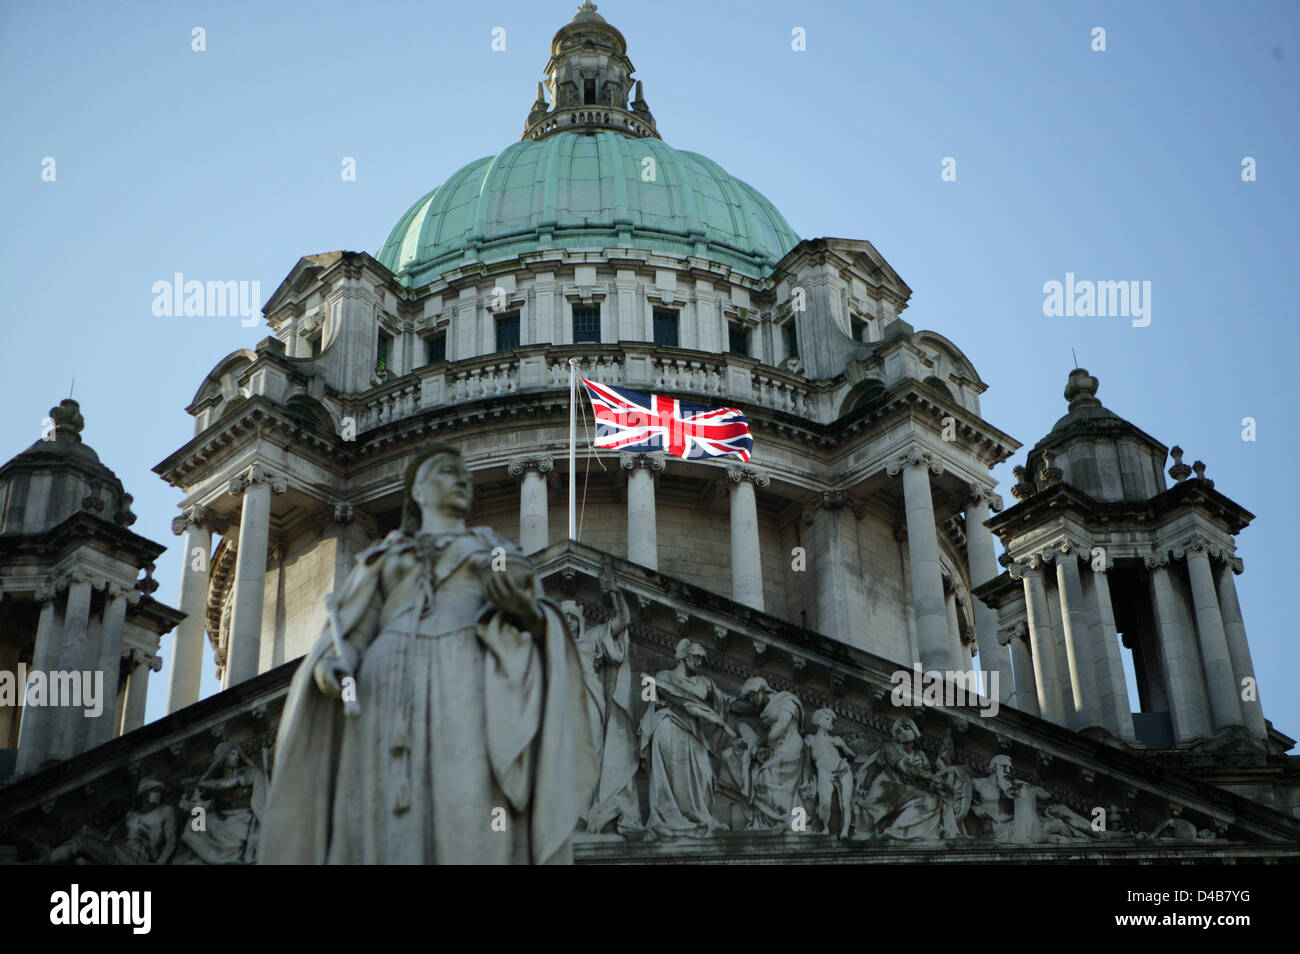 Belfast, UK. 11th March, 2013. To mark Commonwealth Day the Union Flag is flown on Belfast City Hall. This is only one of seventeen days that the Union Flag is flown. The change from 365 days to 17 has caused division in political parties. Belfast City Council took the decision at the council meeting held on the 3rd December 2012. Since then there has been a weekly protest each Saturday outside the grounds of  City hall. Credit:  Bonzo / Alamy Live News Stock Photo